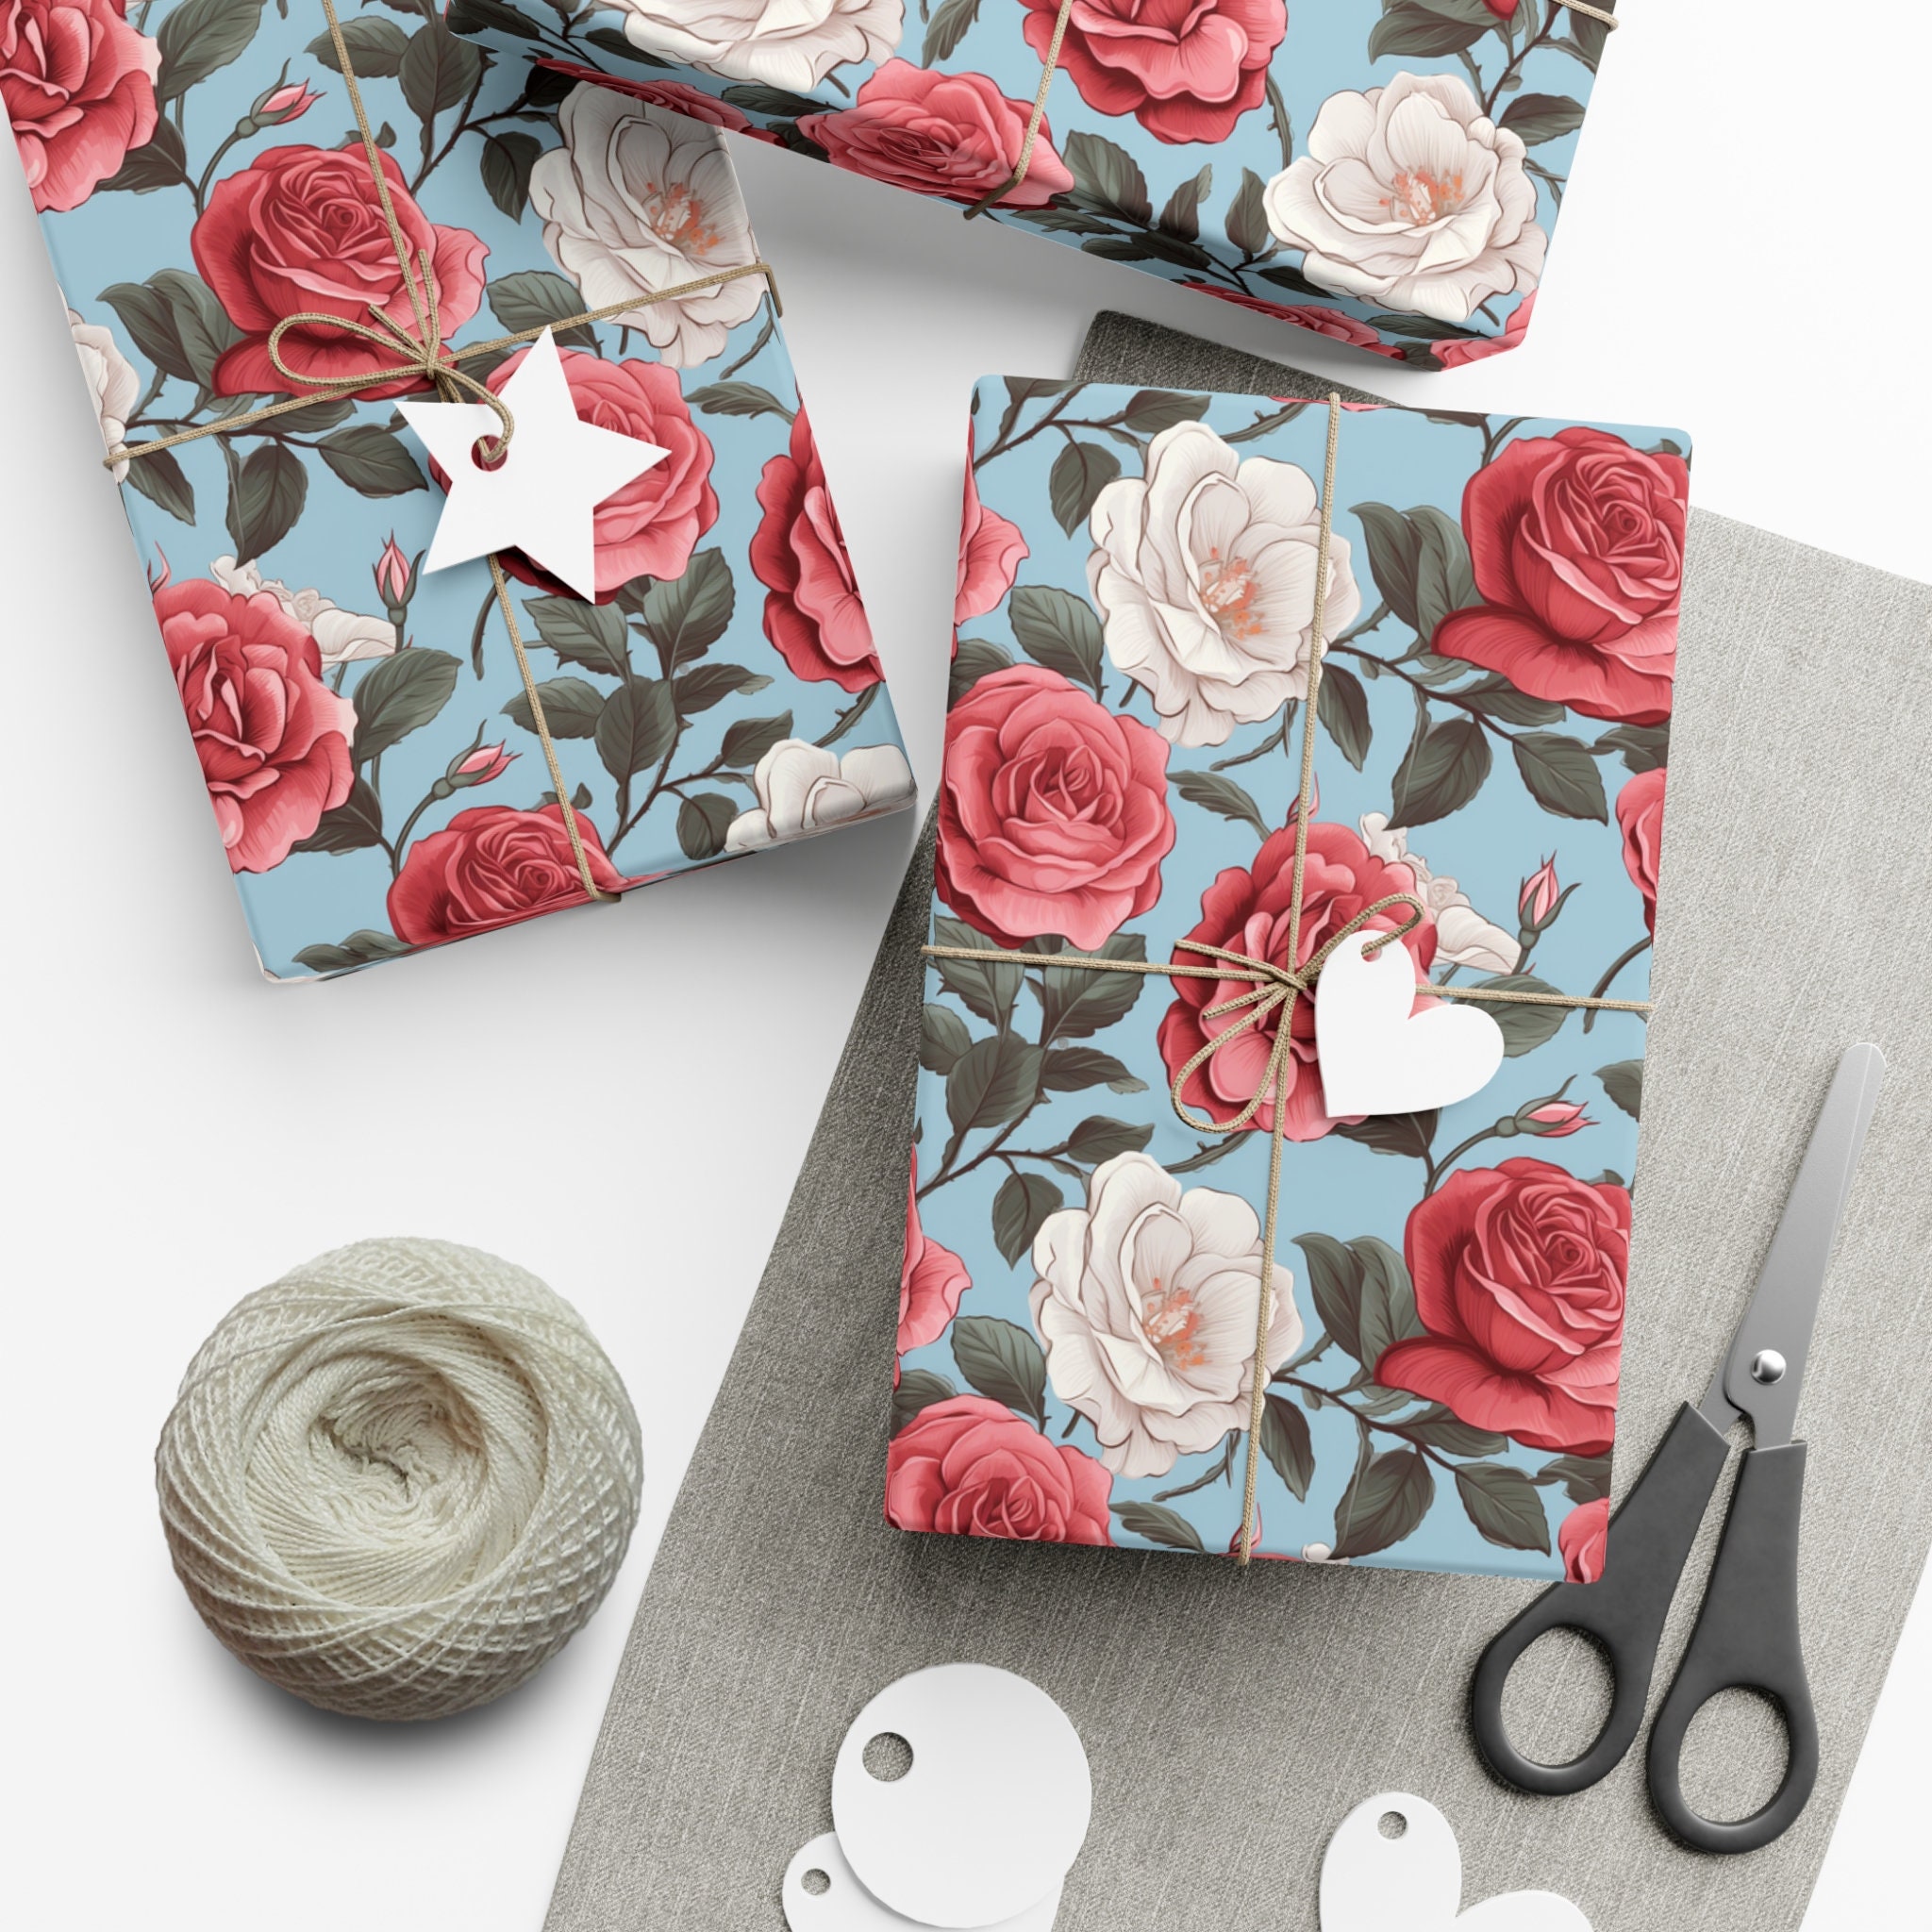 Elegant Red & White Roses Wrapping Paper - Stylish Floral Design on Light  Blue, Ideal for Romantic Gifts, Eco-Friendly